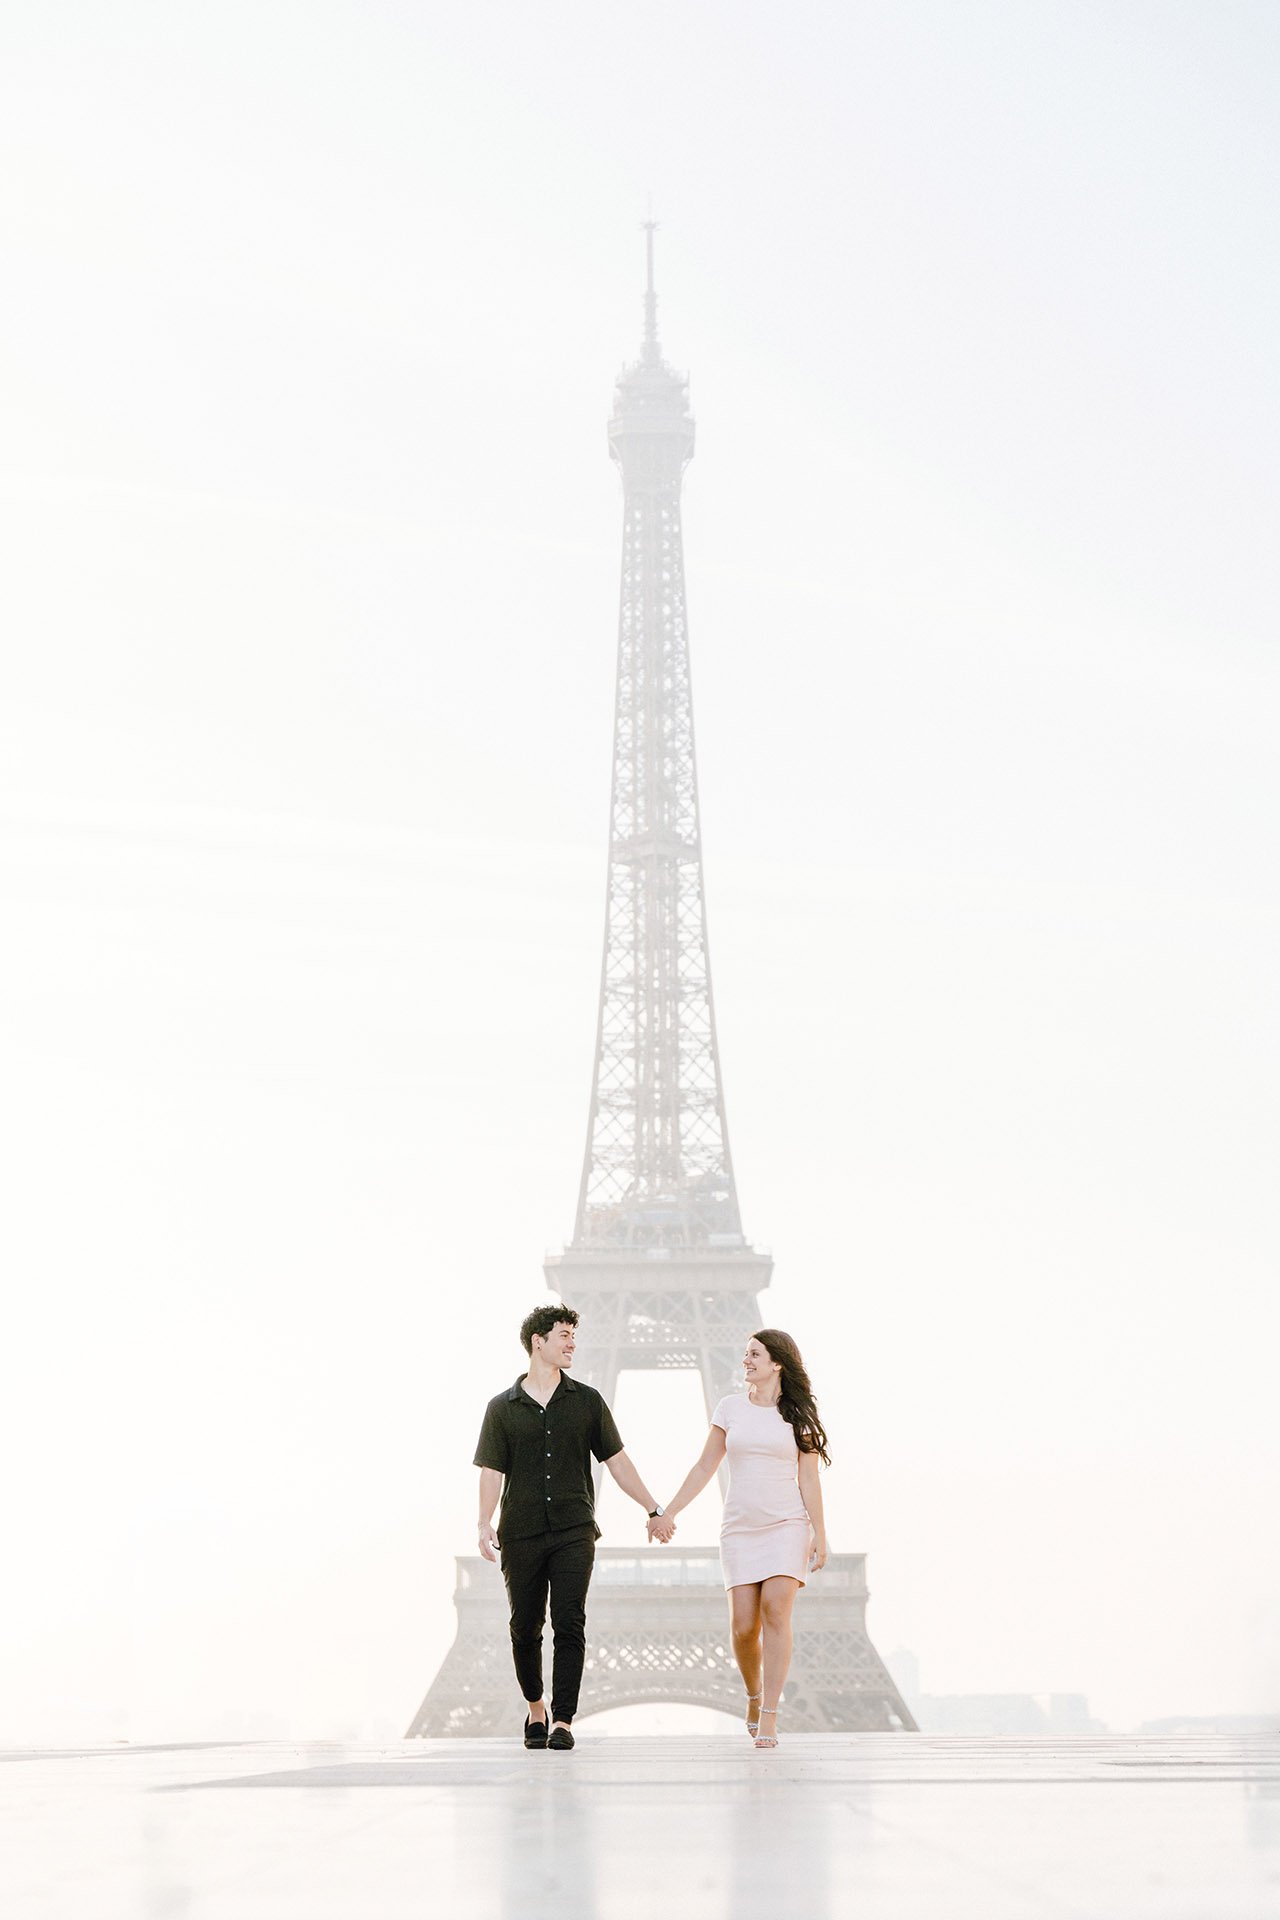 Stunning Paris Engagement Photoshoot in front of the Eiffel Tower